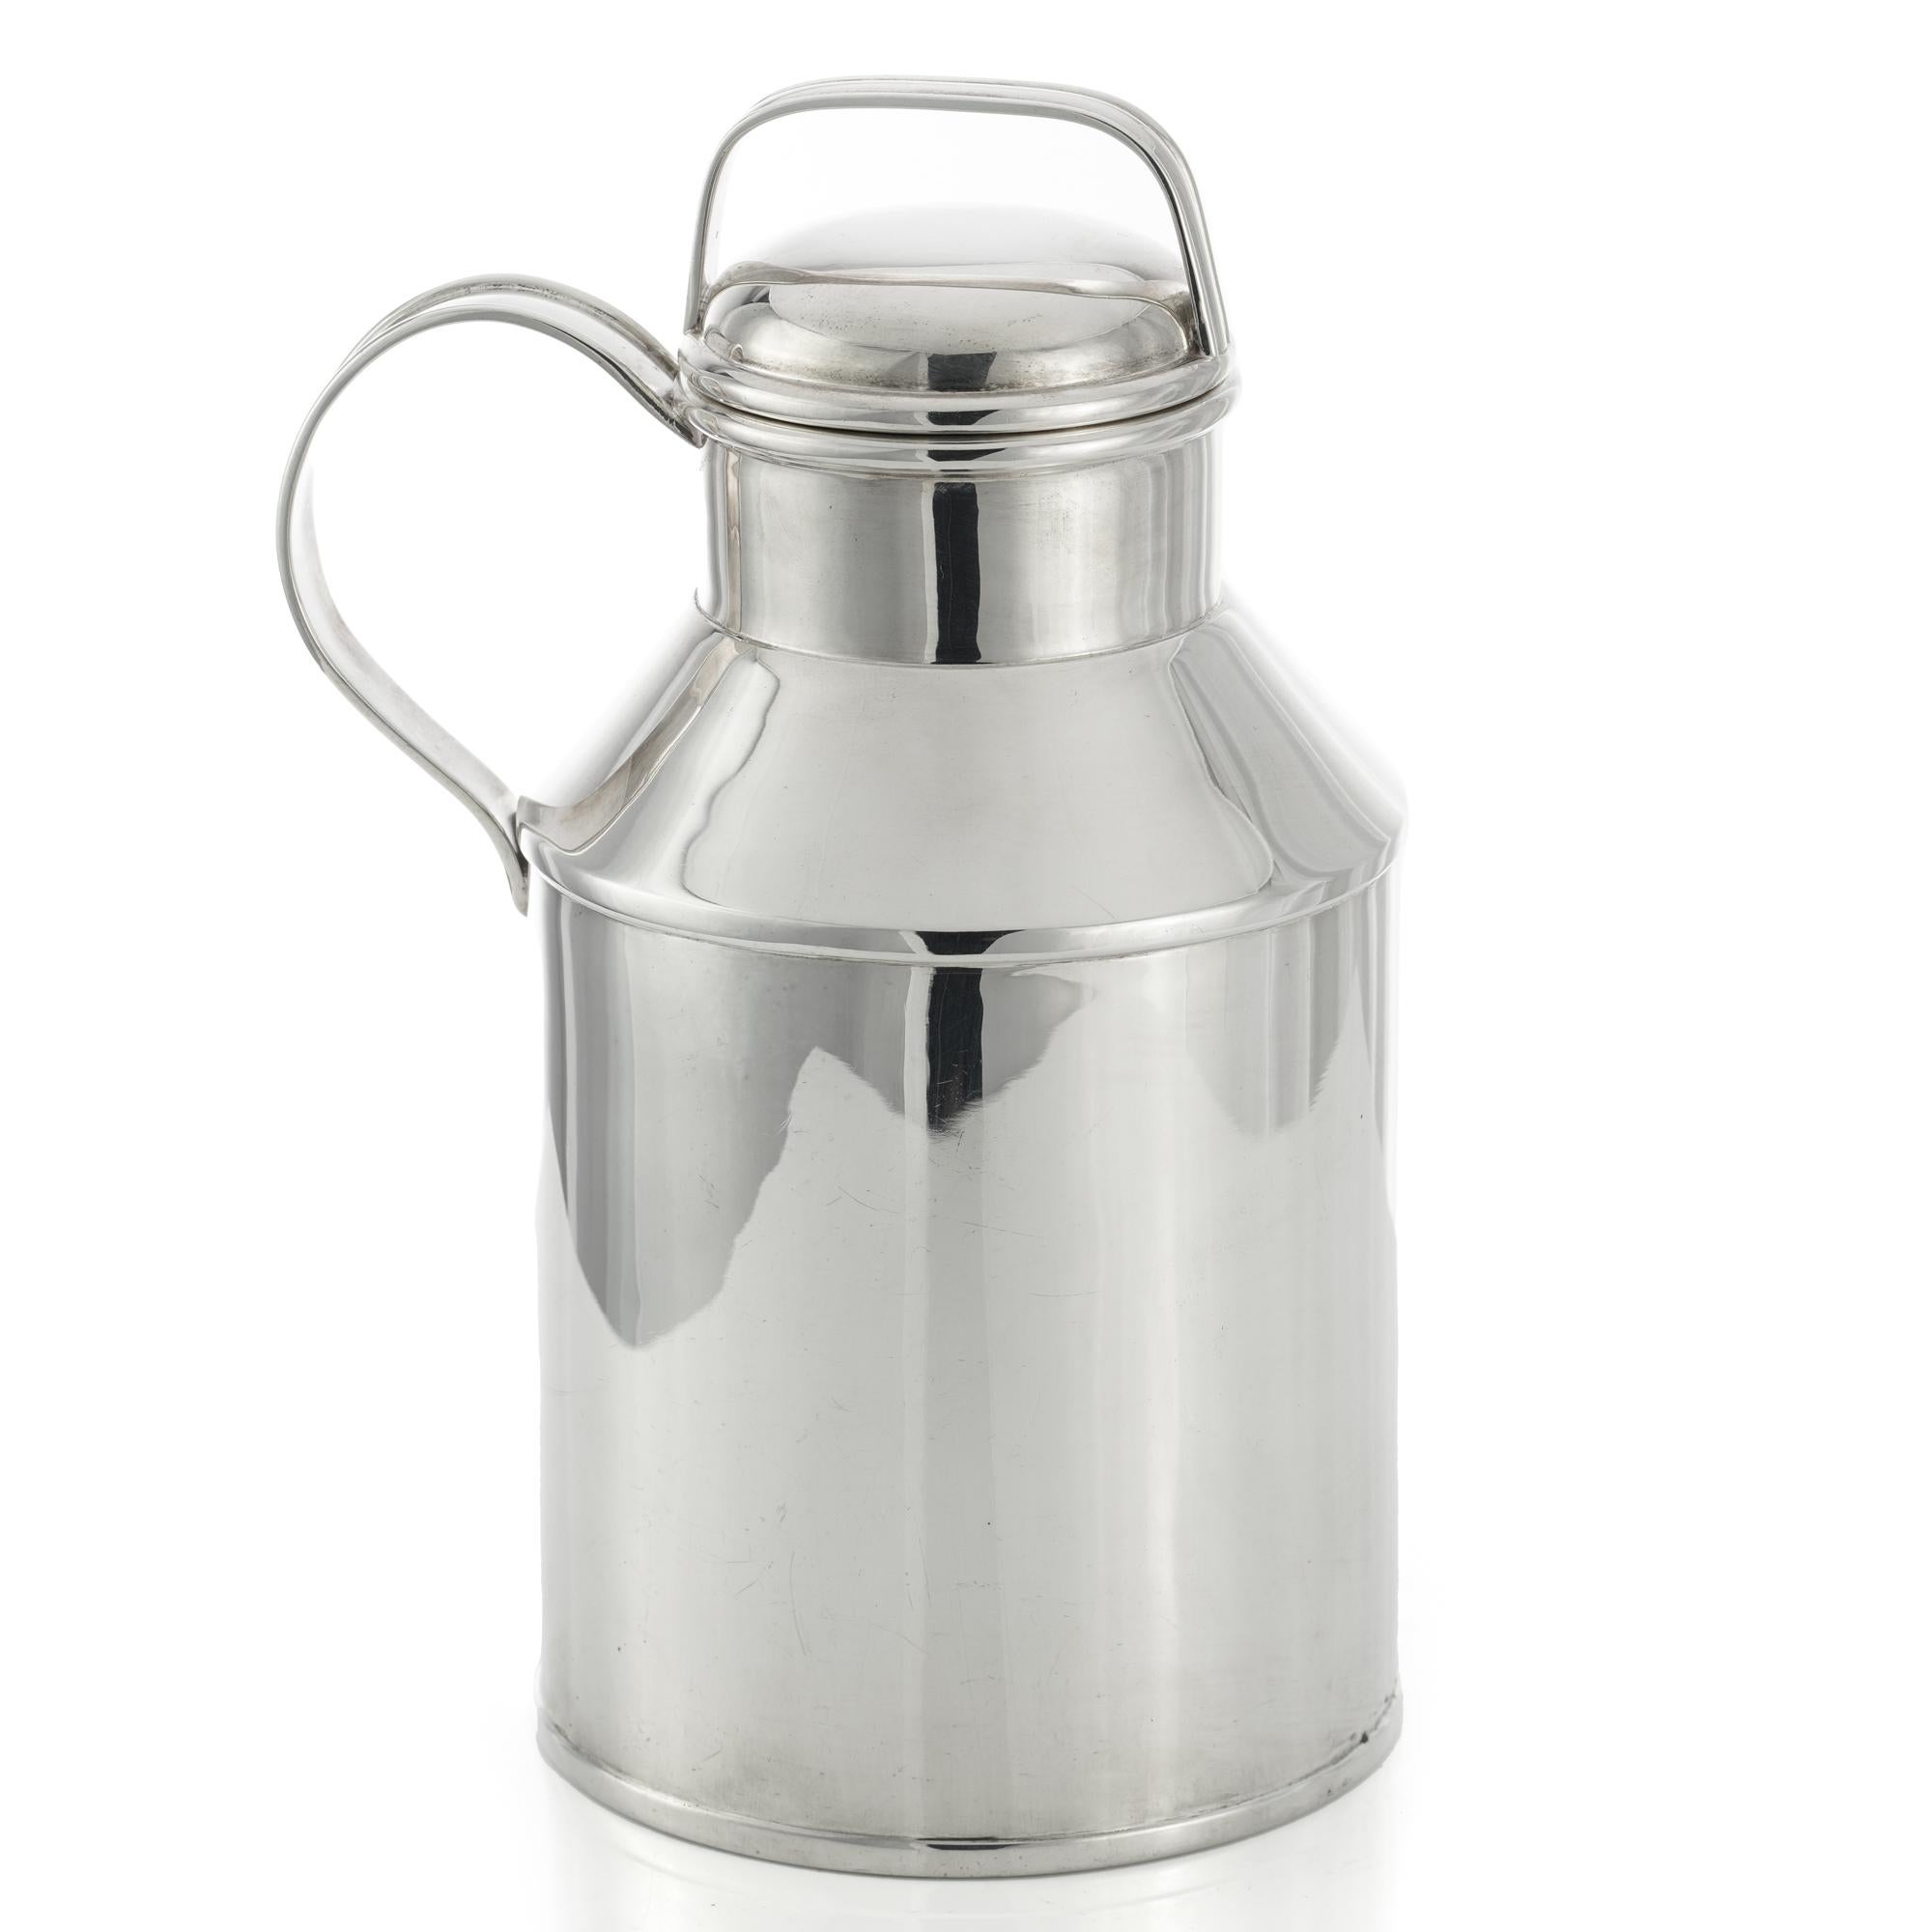 A novelty American 925 sterling silver 'milk can' cocktail shaker by Tuttle, Boston. 
Can designed with handle and pull-off cap, the cocktail shaker with bayonet-fitting strainer. 
Made in the United States. Ca.1933 - 1945
Retailed by Shreve,